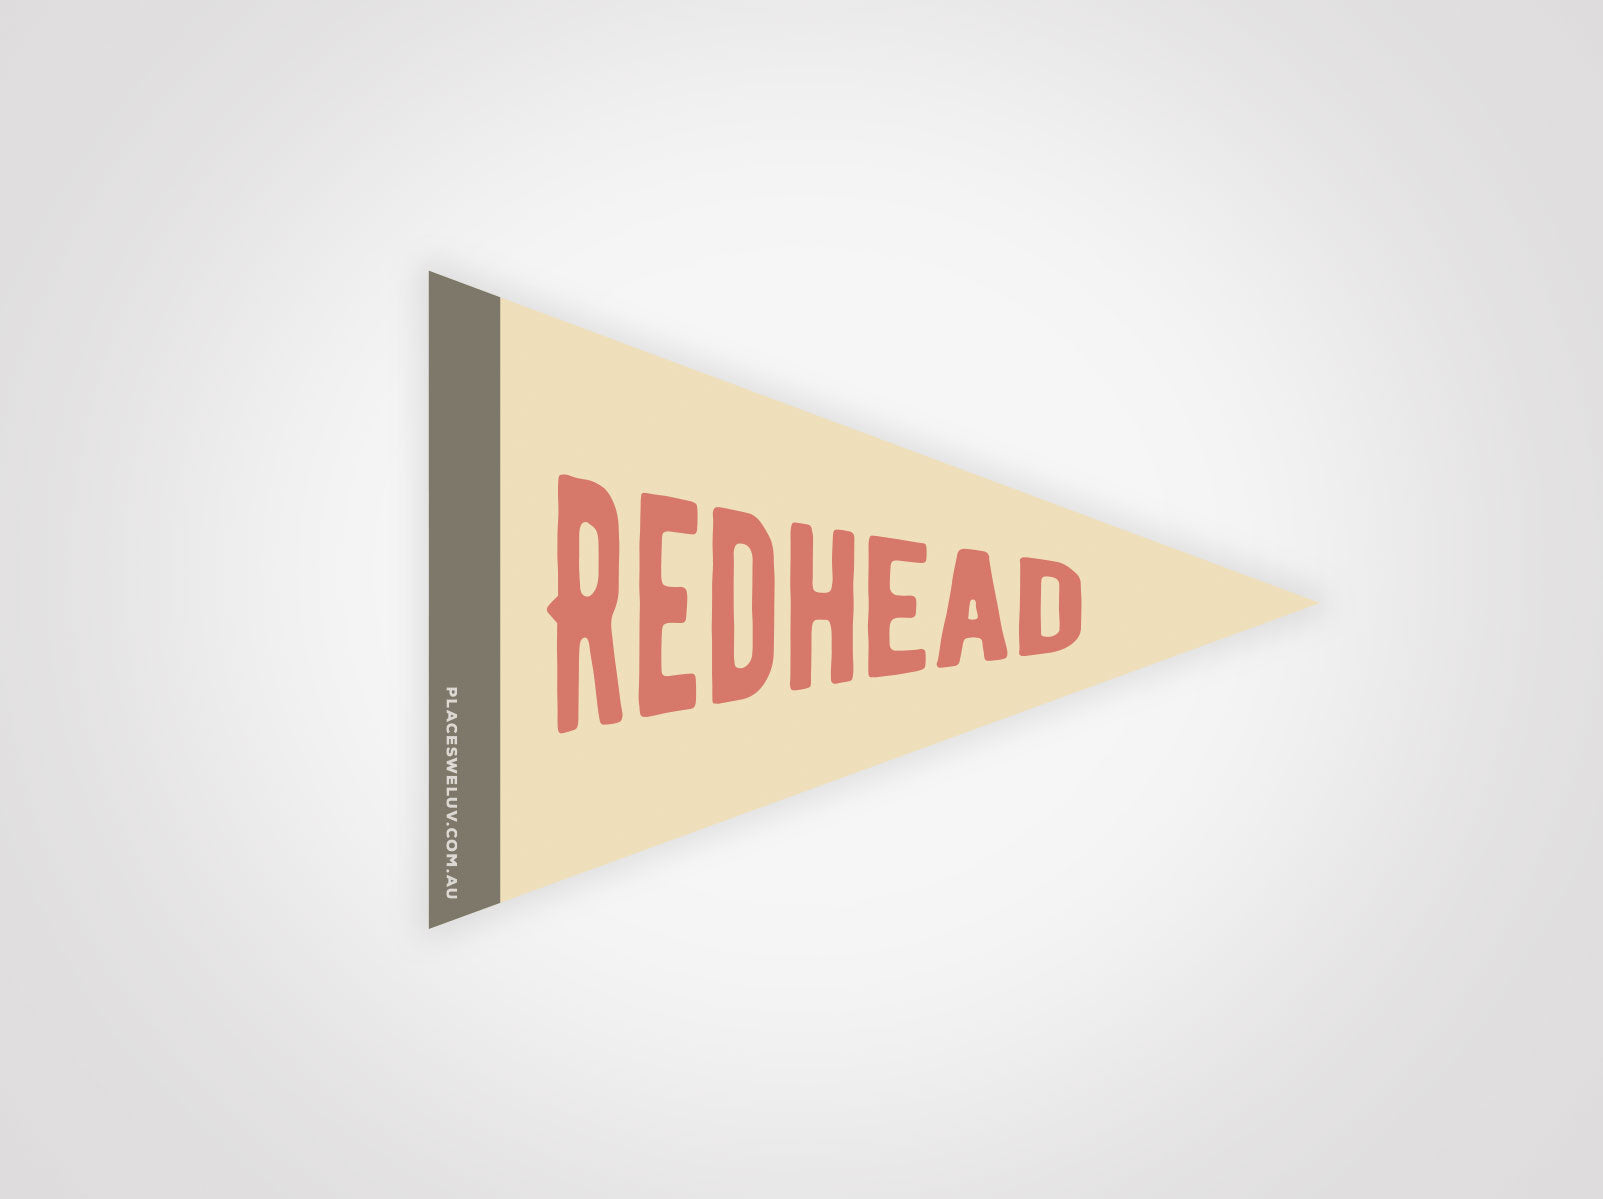 Redhead travel style retro flag decal by places we luv